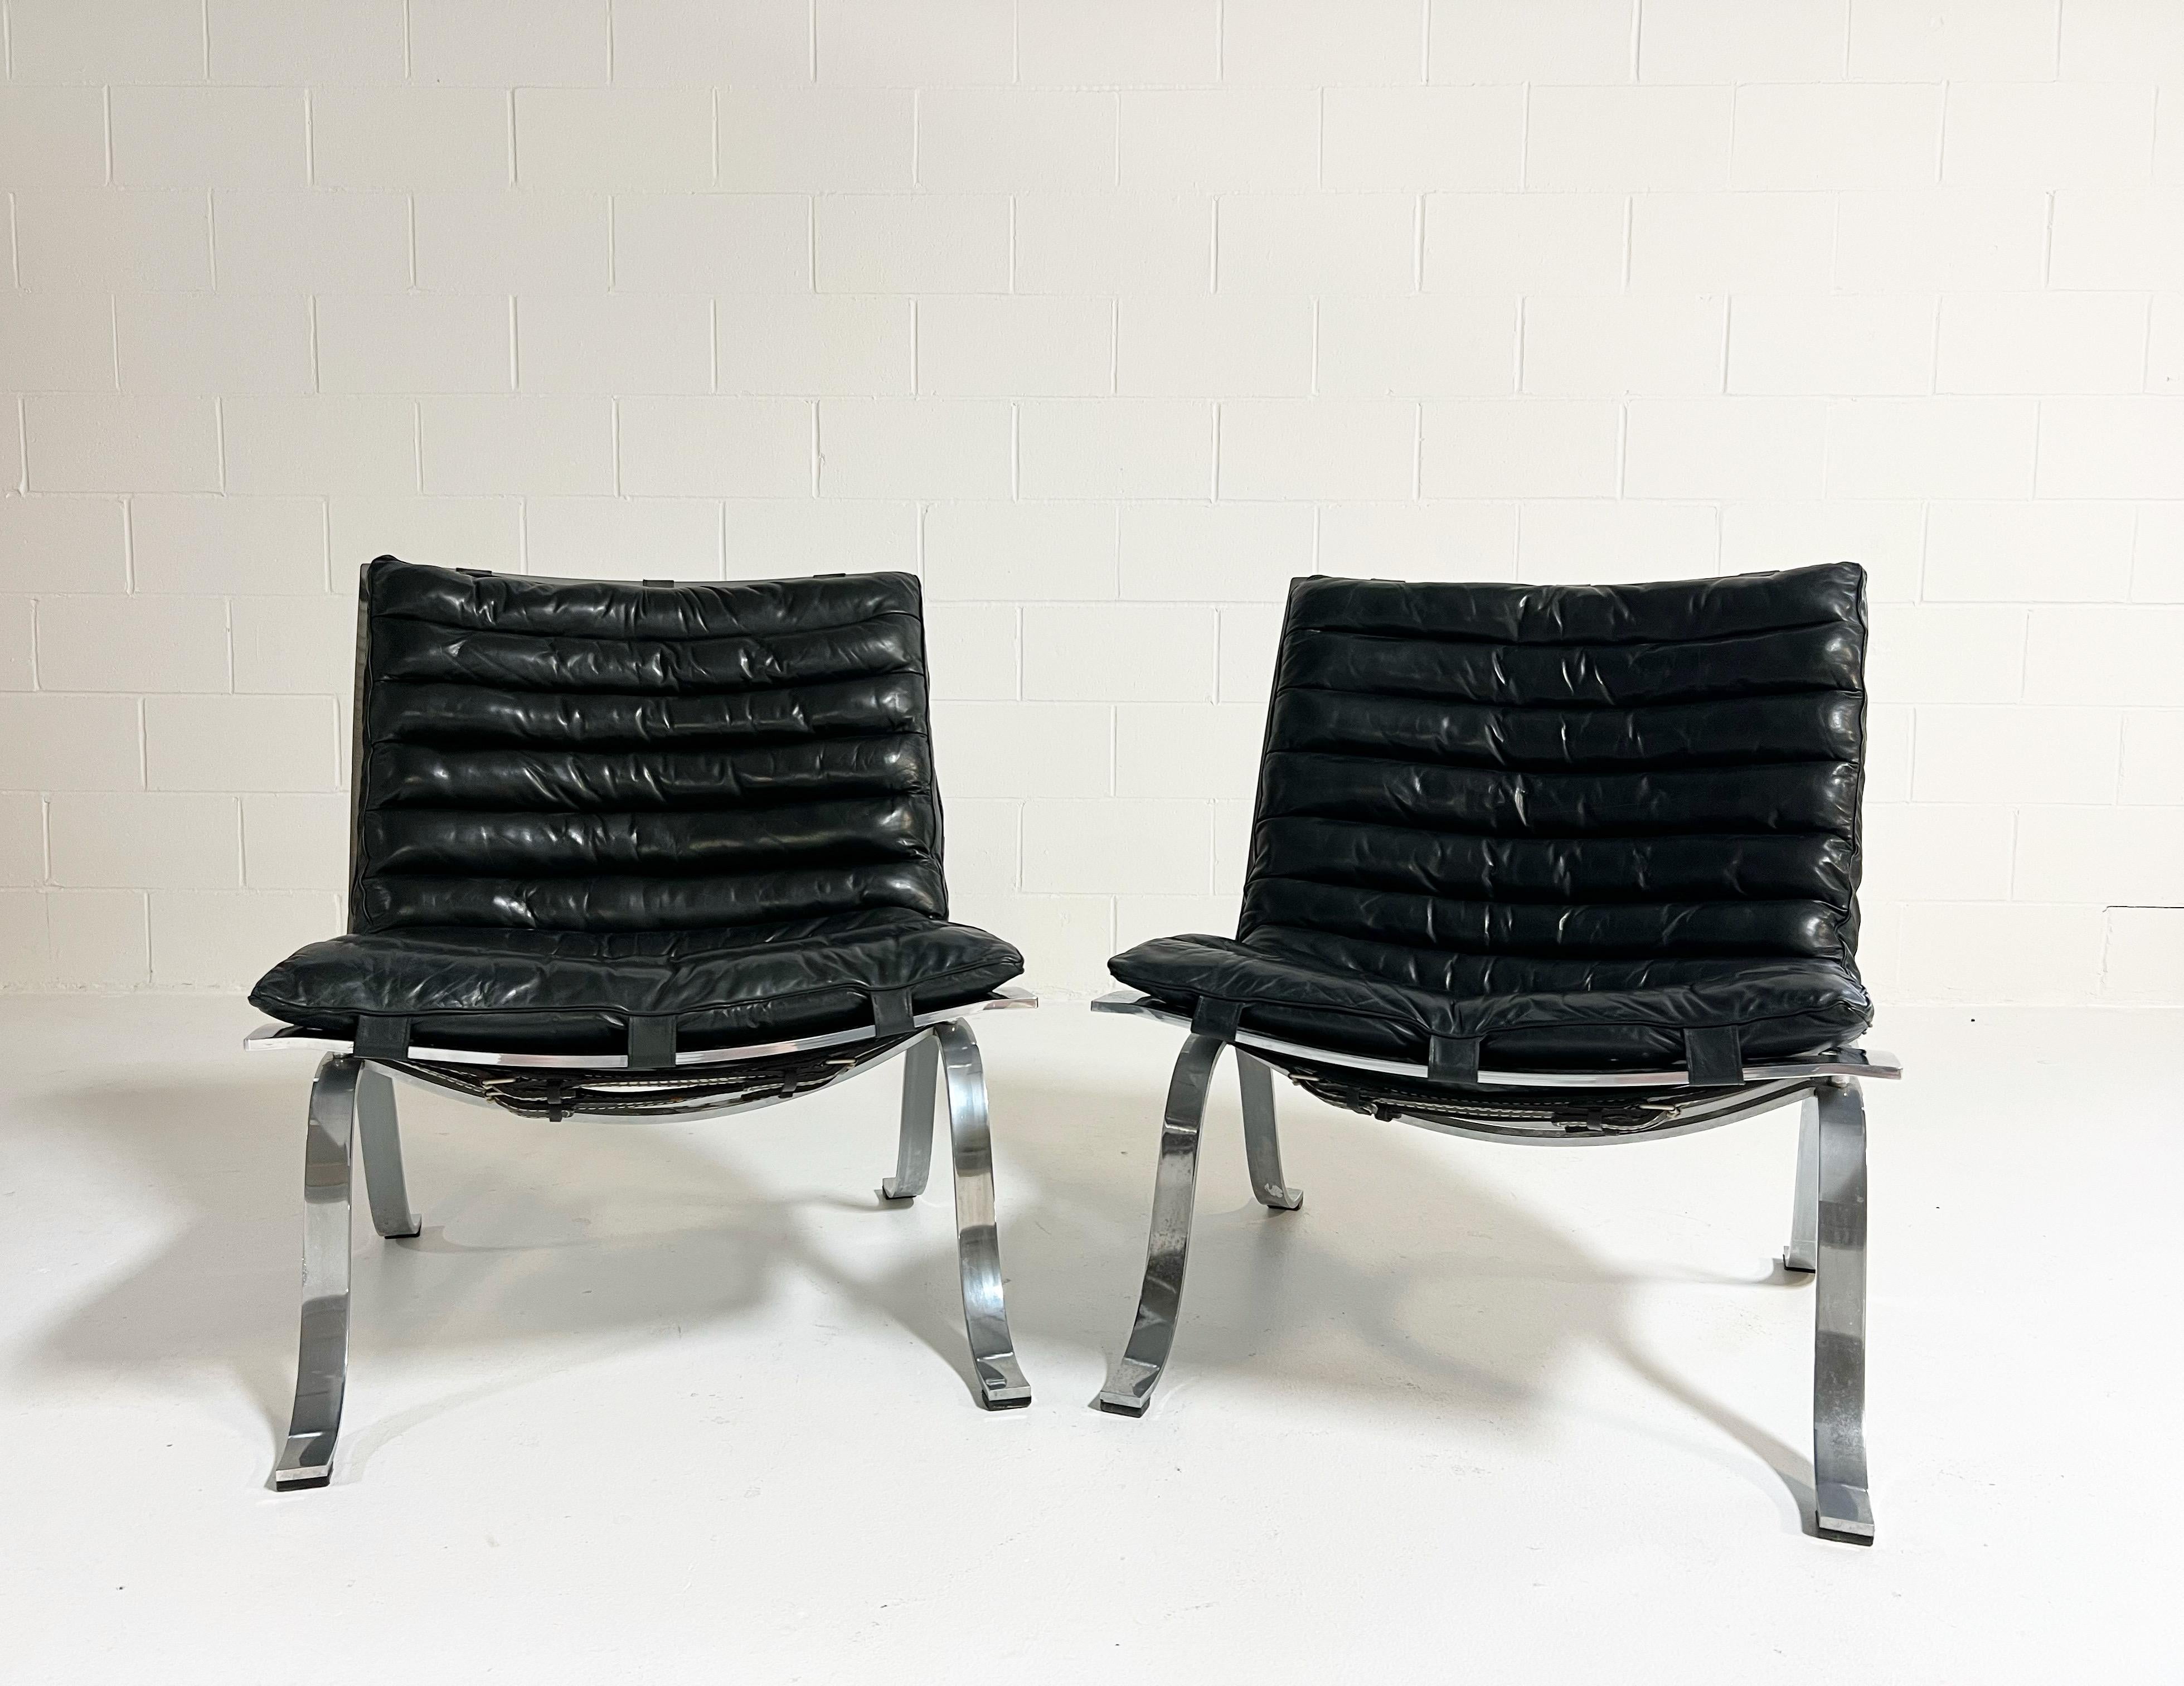 This is a rare and early pair of the Ariet lounge chair. Arne Norell's most famous design comprising of a chrome frame, leather belts and buffalo leather channeled cushion. Nothin better than chrome and black and leather. 

Manufacturer
Norell